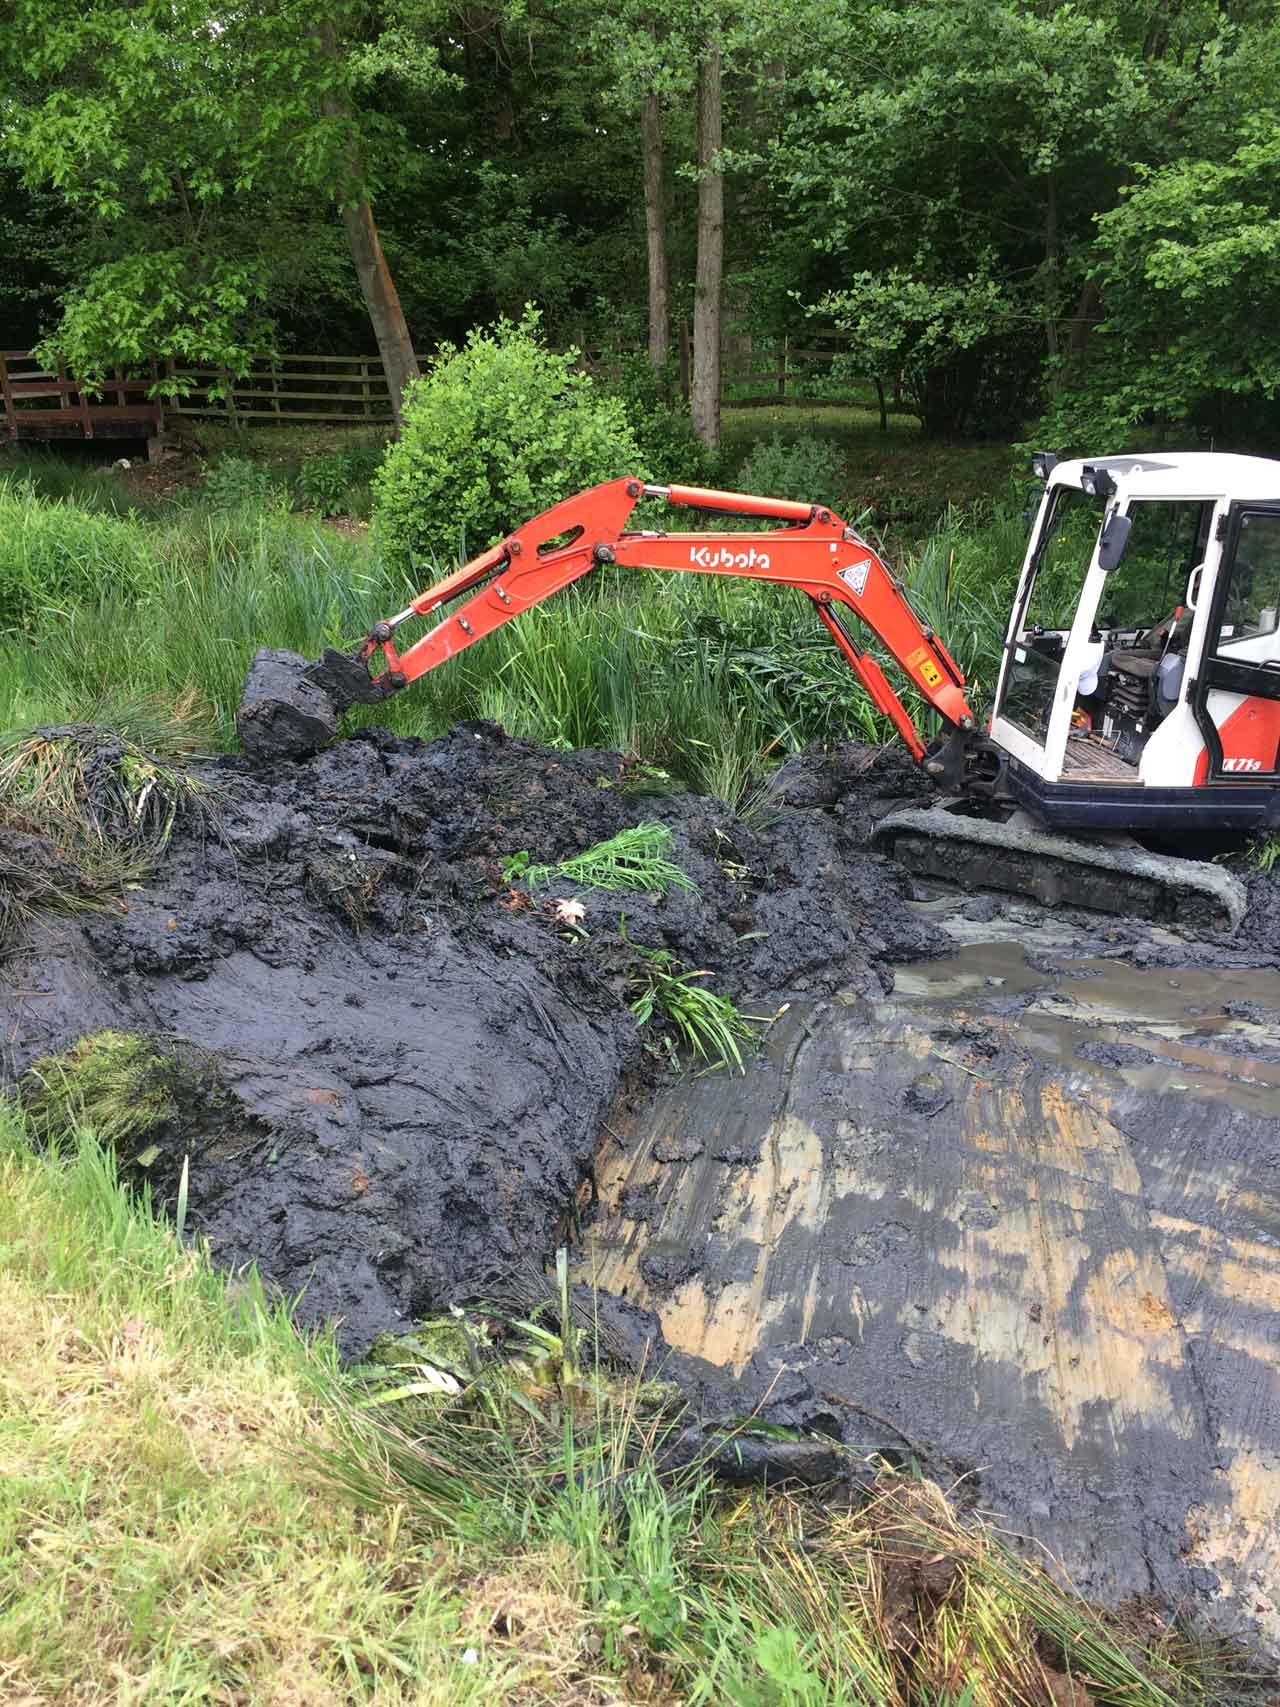 Image of a Kubota excavator clearing a lake ready for traditional clay lake relining at Barkham in Berkshire - Let the digger do it!